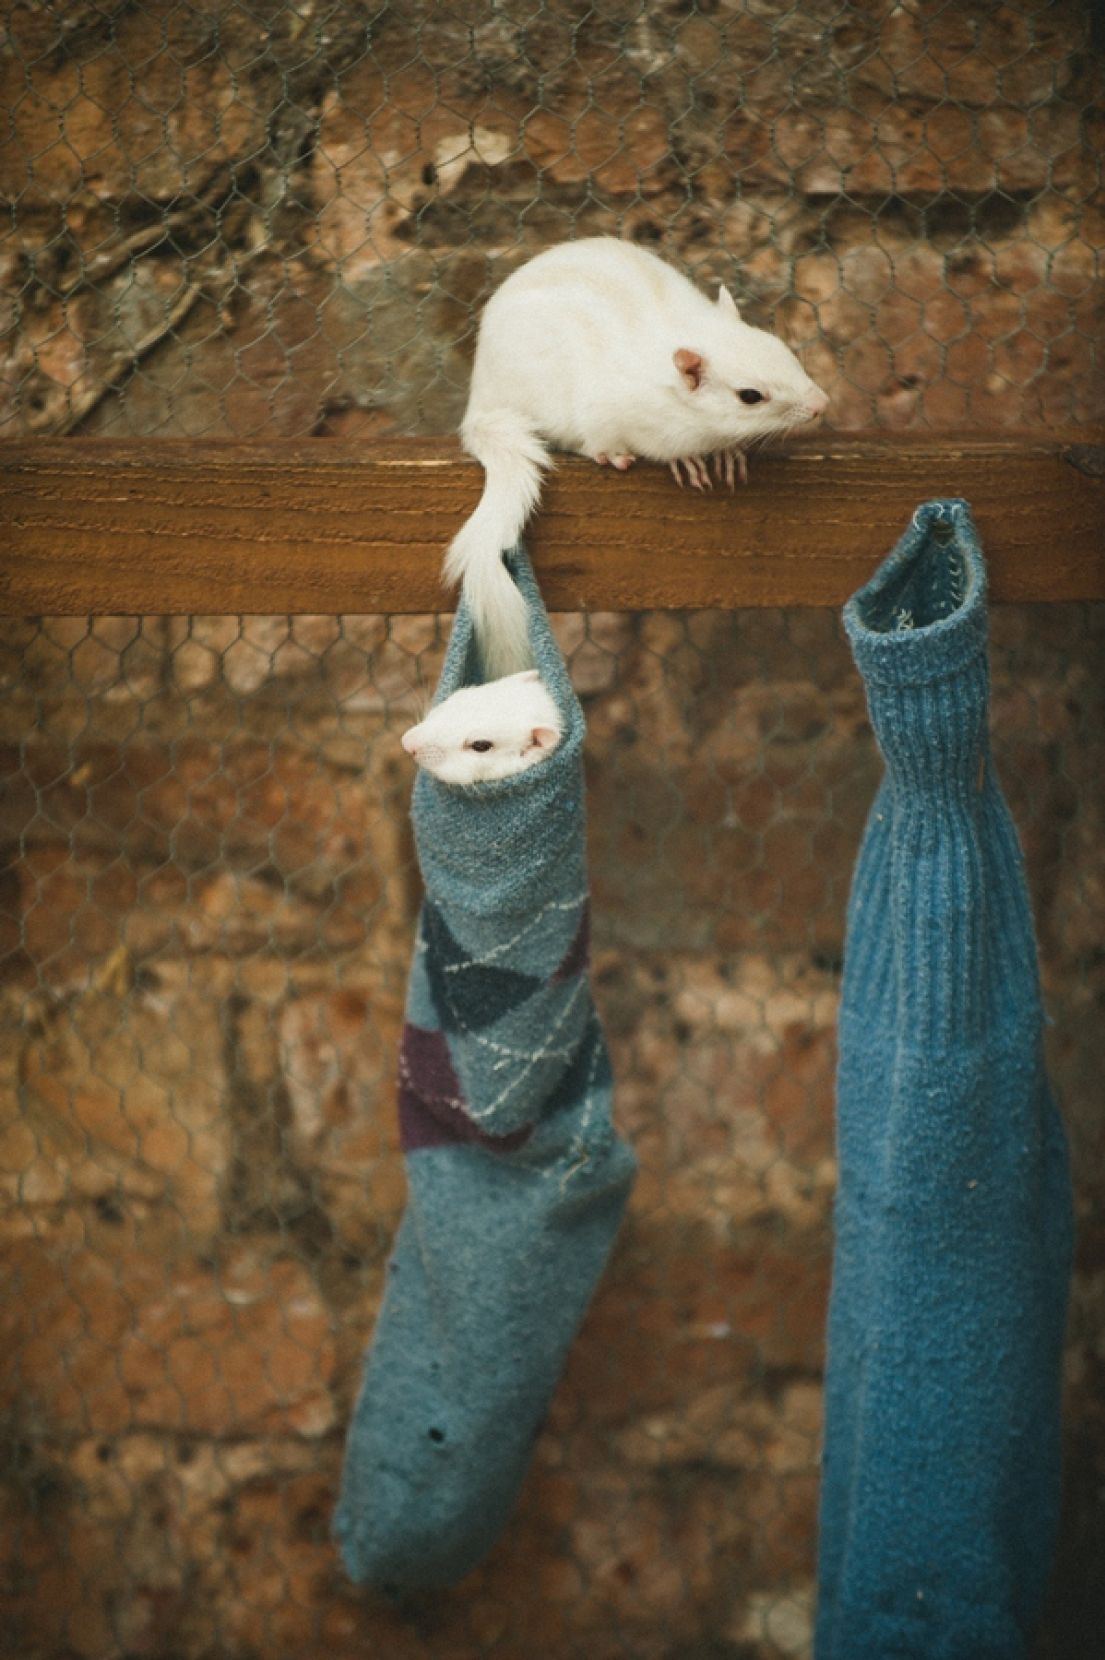 Two blue socks hanging on a wooden post on a garden wall - one with a chipmunk hiding inside, another with a white chipmunk walking along the wood. 